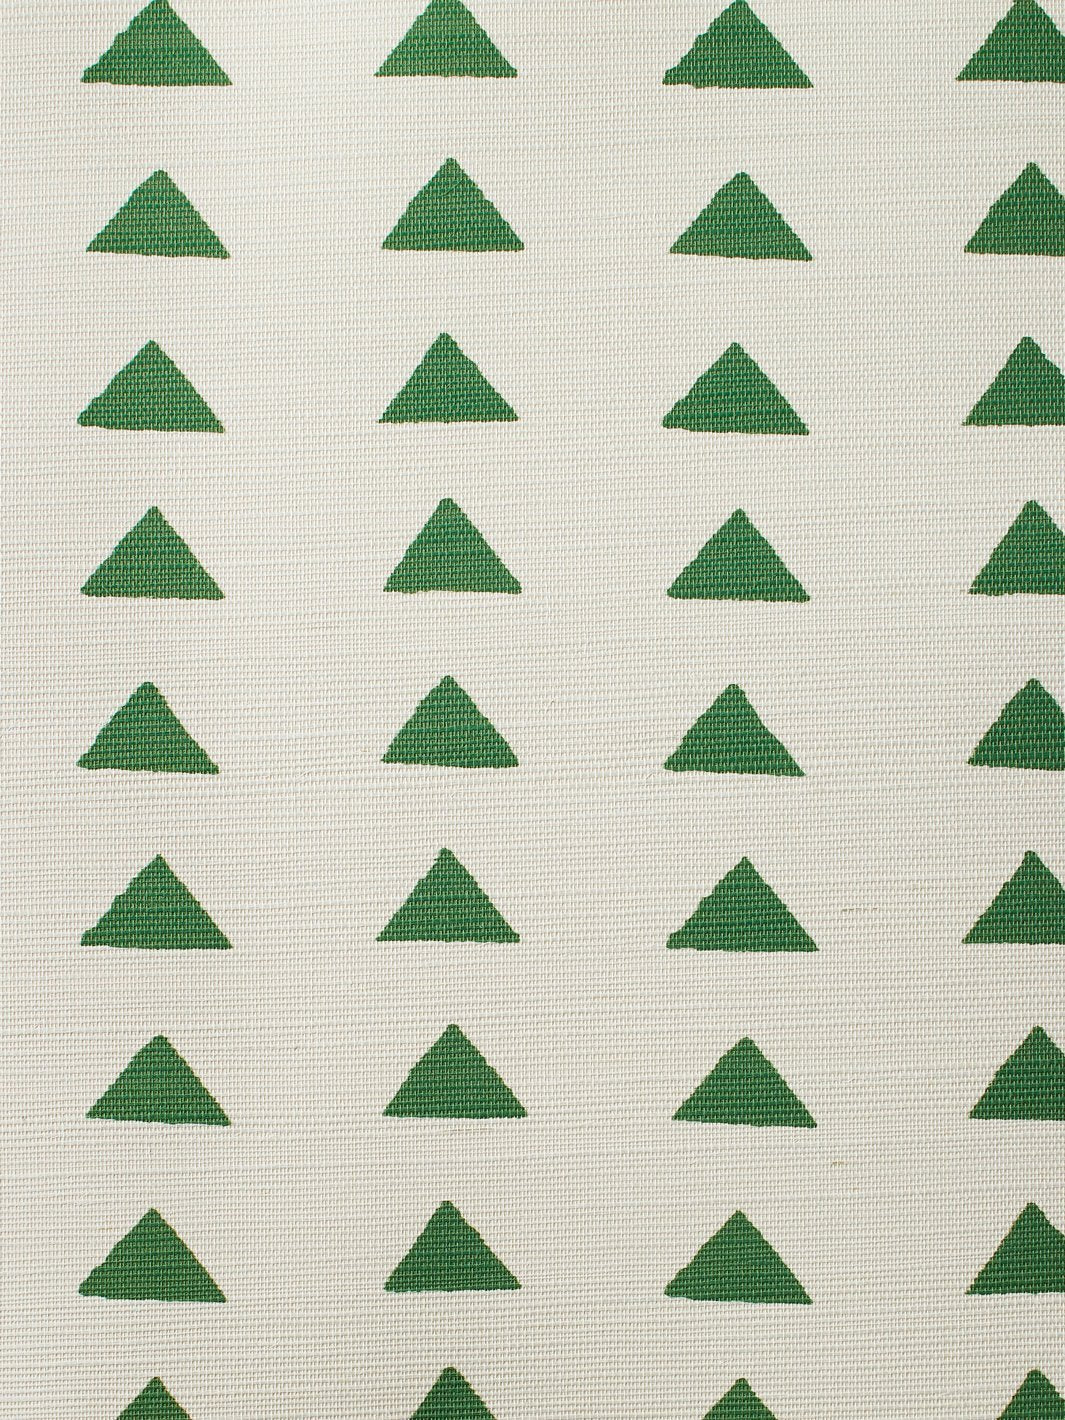 'Triangles' Grasscloth' Wallpaper by Nathan Turner - Green